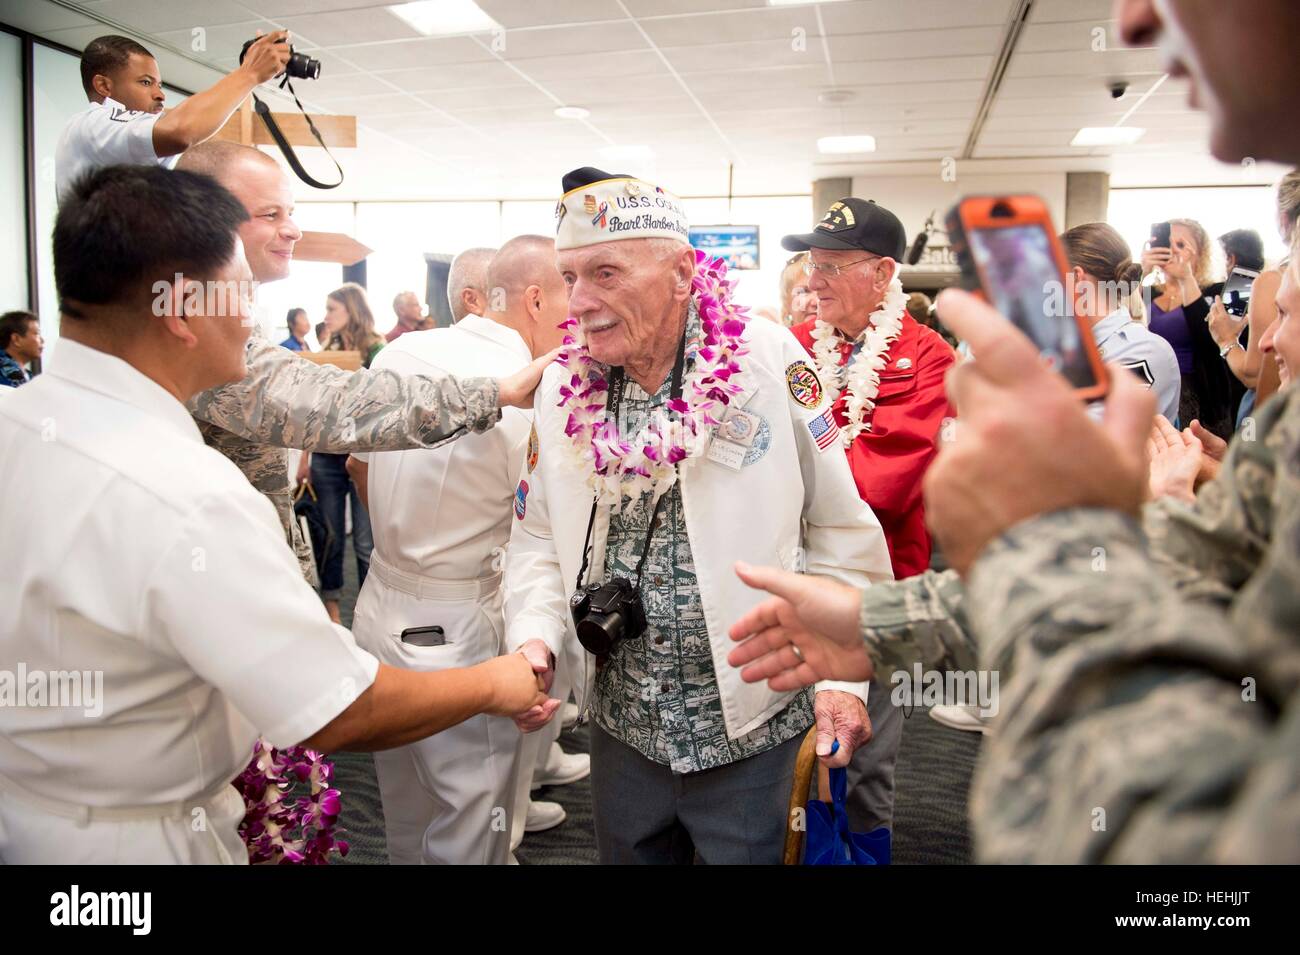 A World War II Pearl Harbor U.S. veteran is greeted by U.S. soldiers with floral leis after arriving at the Honolulu International Airport to participate in commemoration events to honoring the 75th anniversary of the Pearl Harbor attacks December 3, 2016 in Honolulu, Hawaii. Stock Photo